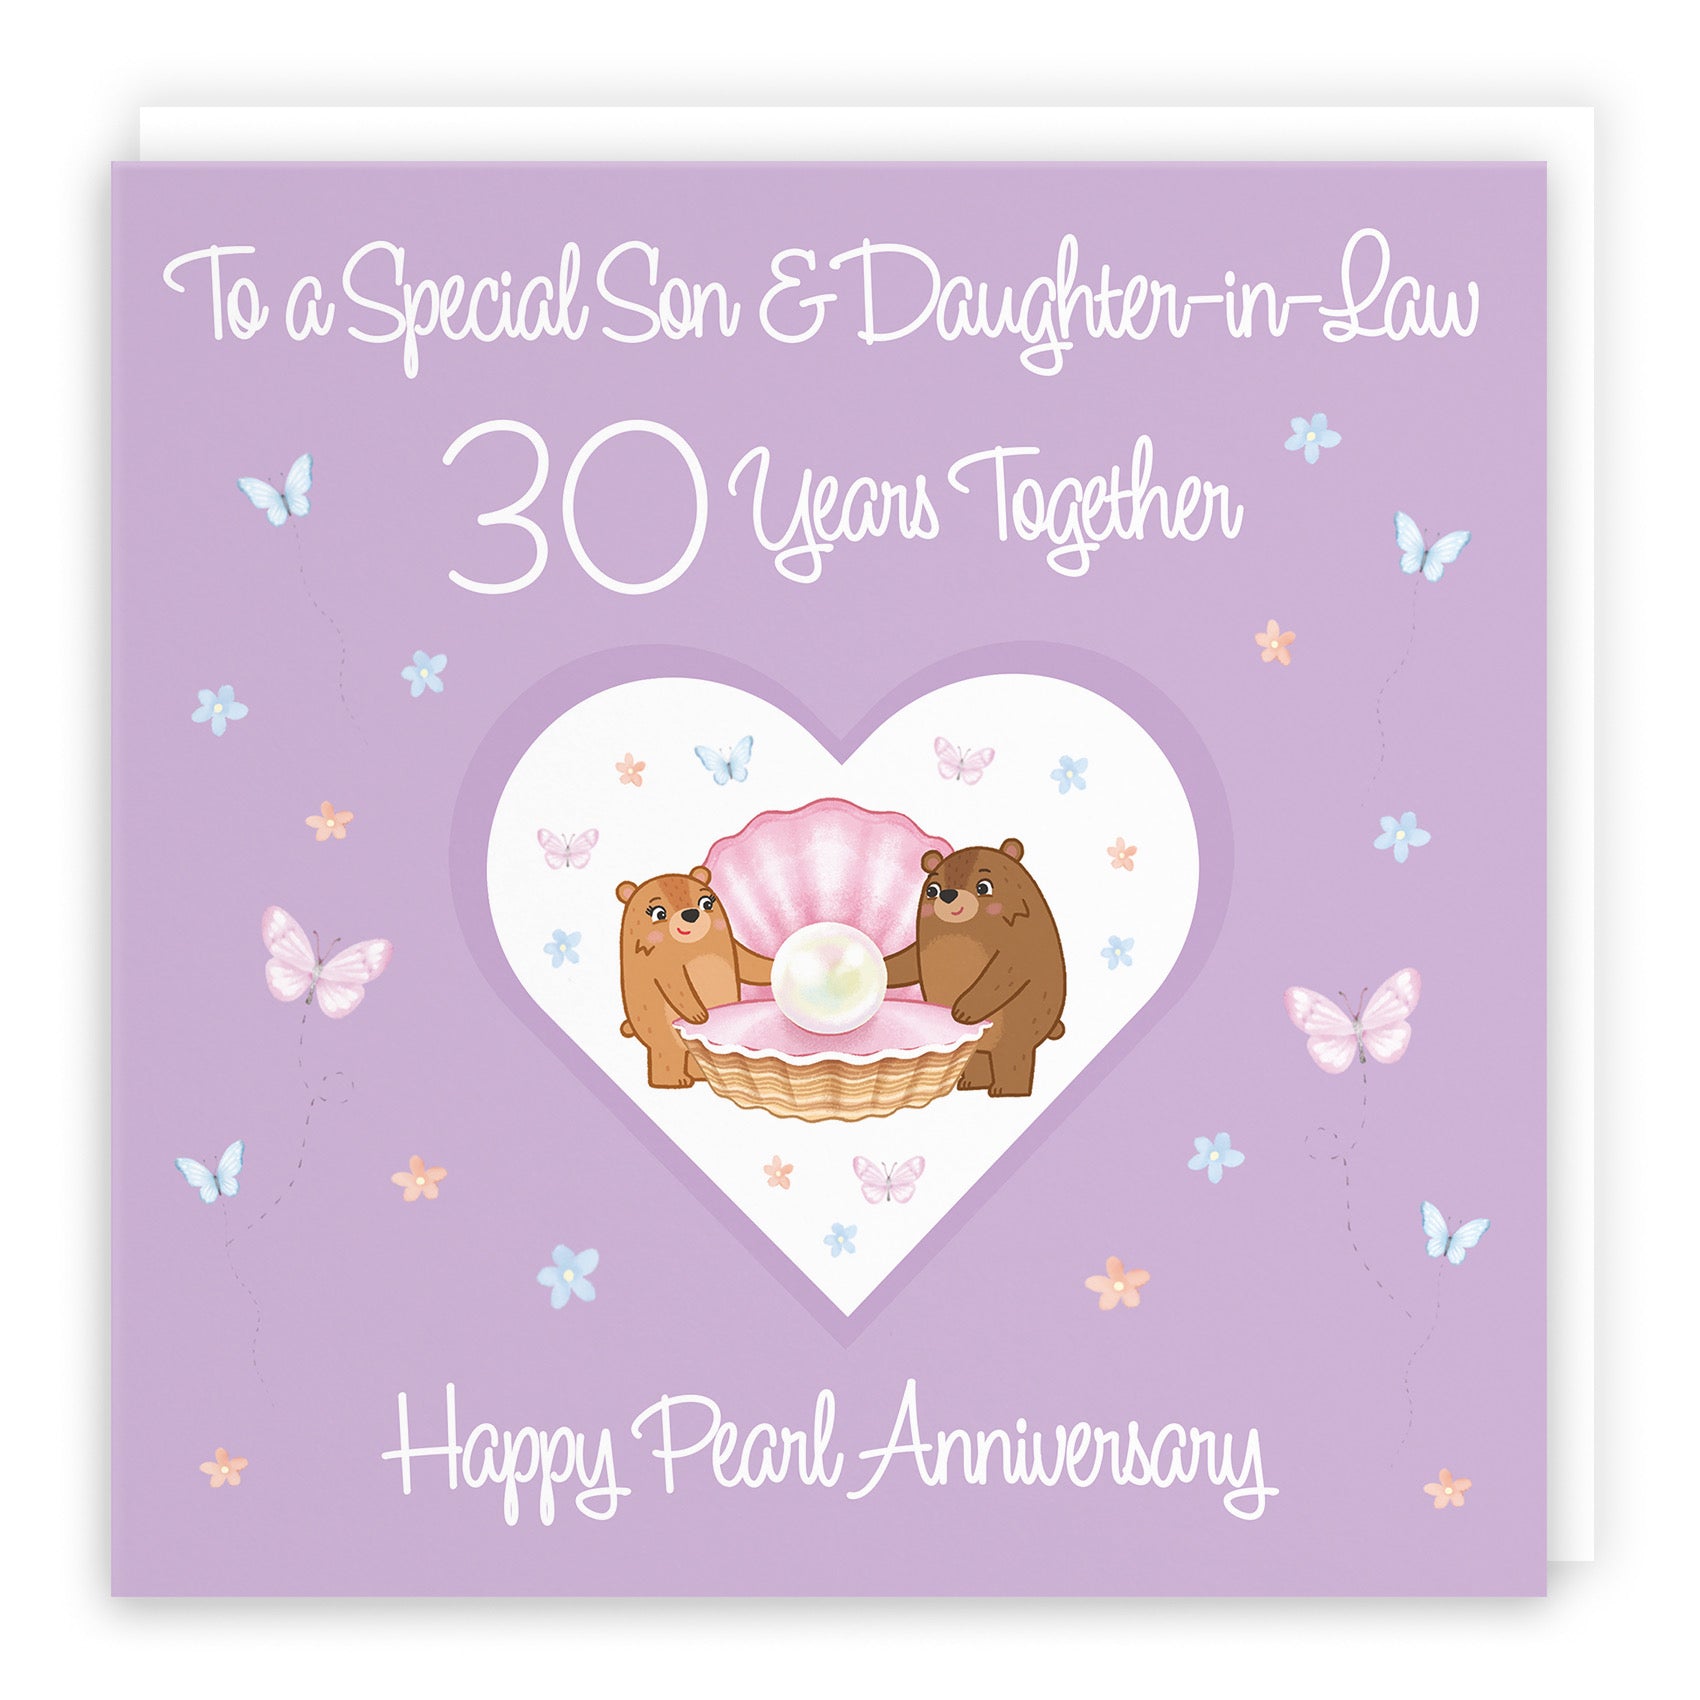 Large Son & Daughter-in-Law 30th Anniversary Card Romantic Meadows - Default Title (B0CXY4K7MD)